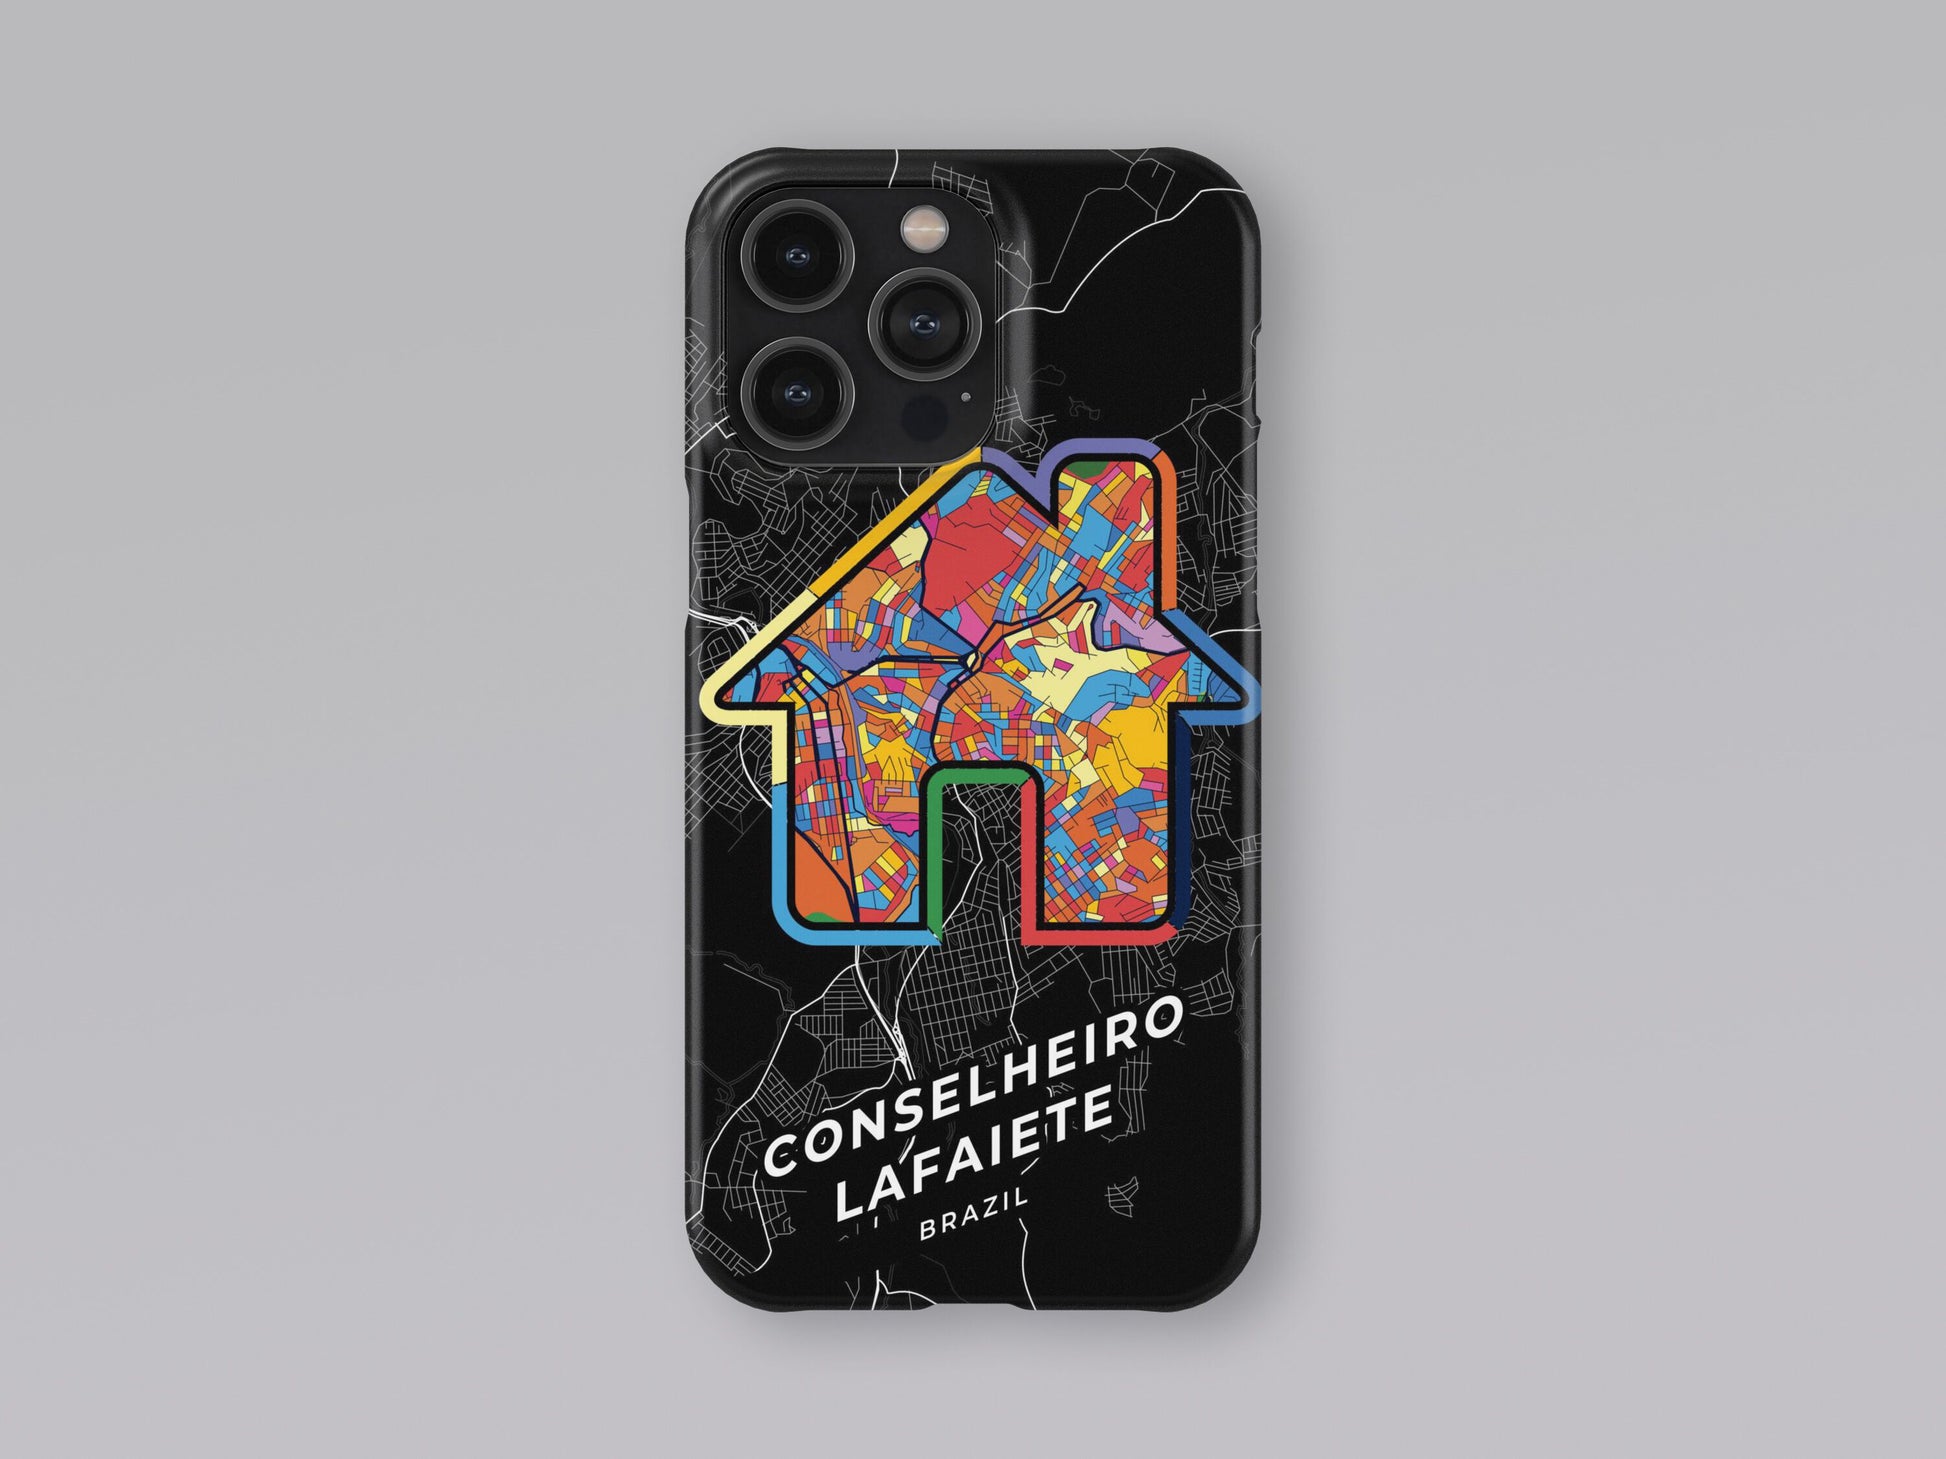 Conselheiro Lafaiete Brazil slim phone case with colorful icon. Birthday, wedding or housewarming gift. Couple match cases. 3